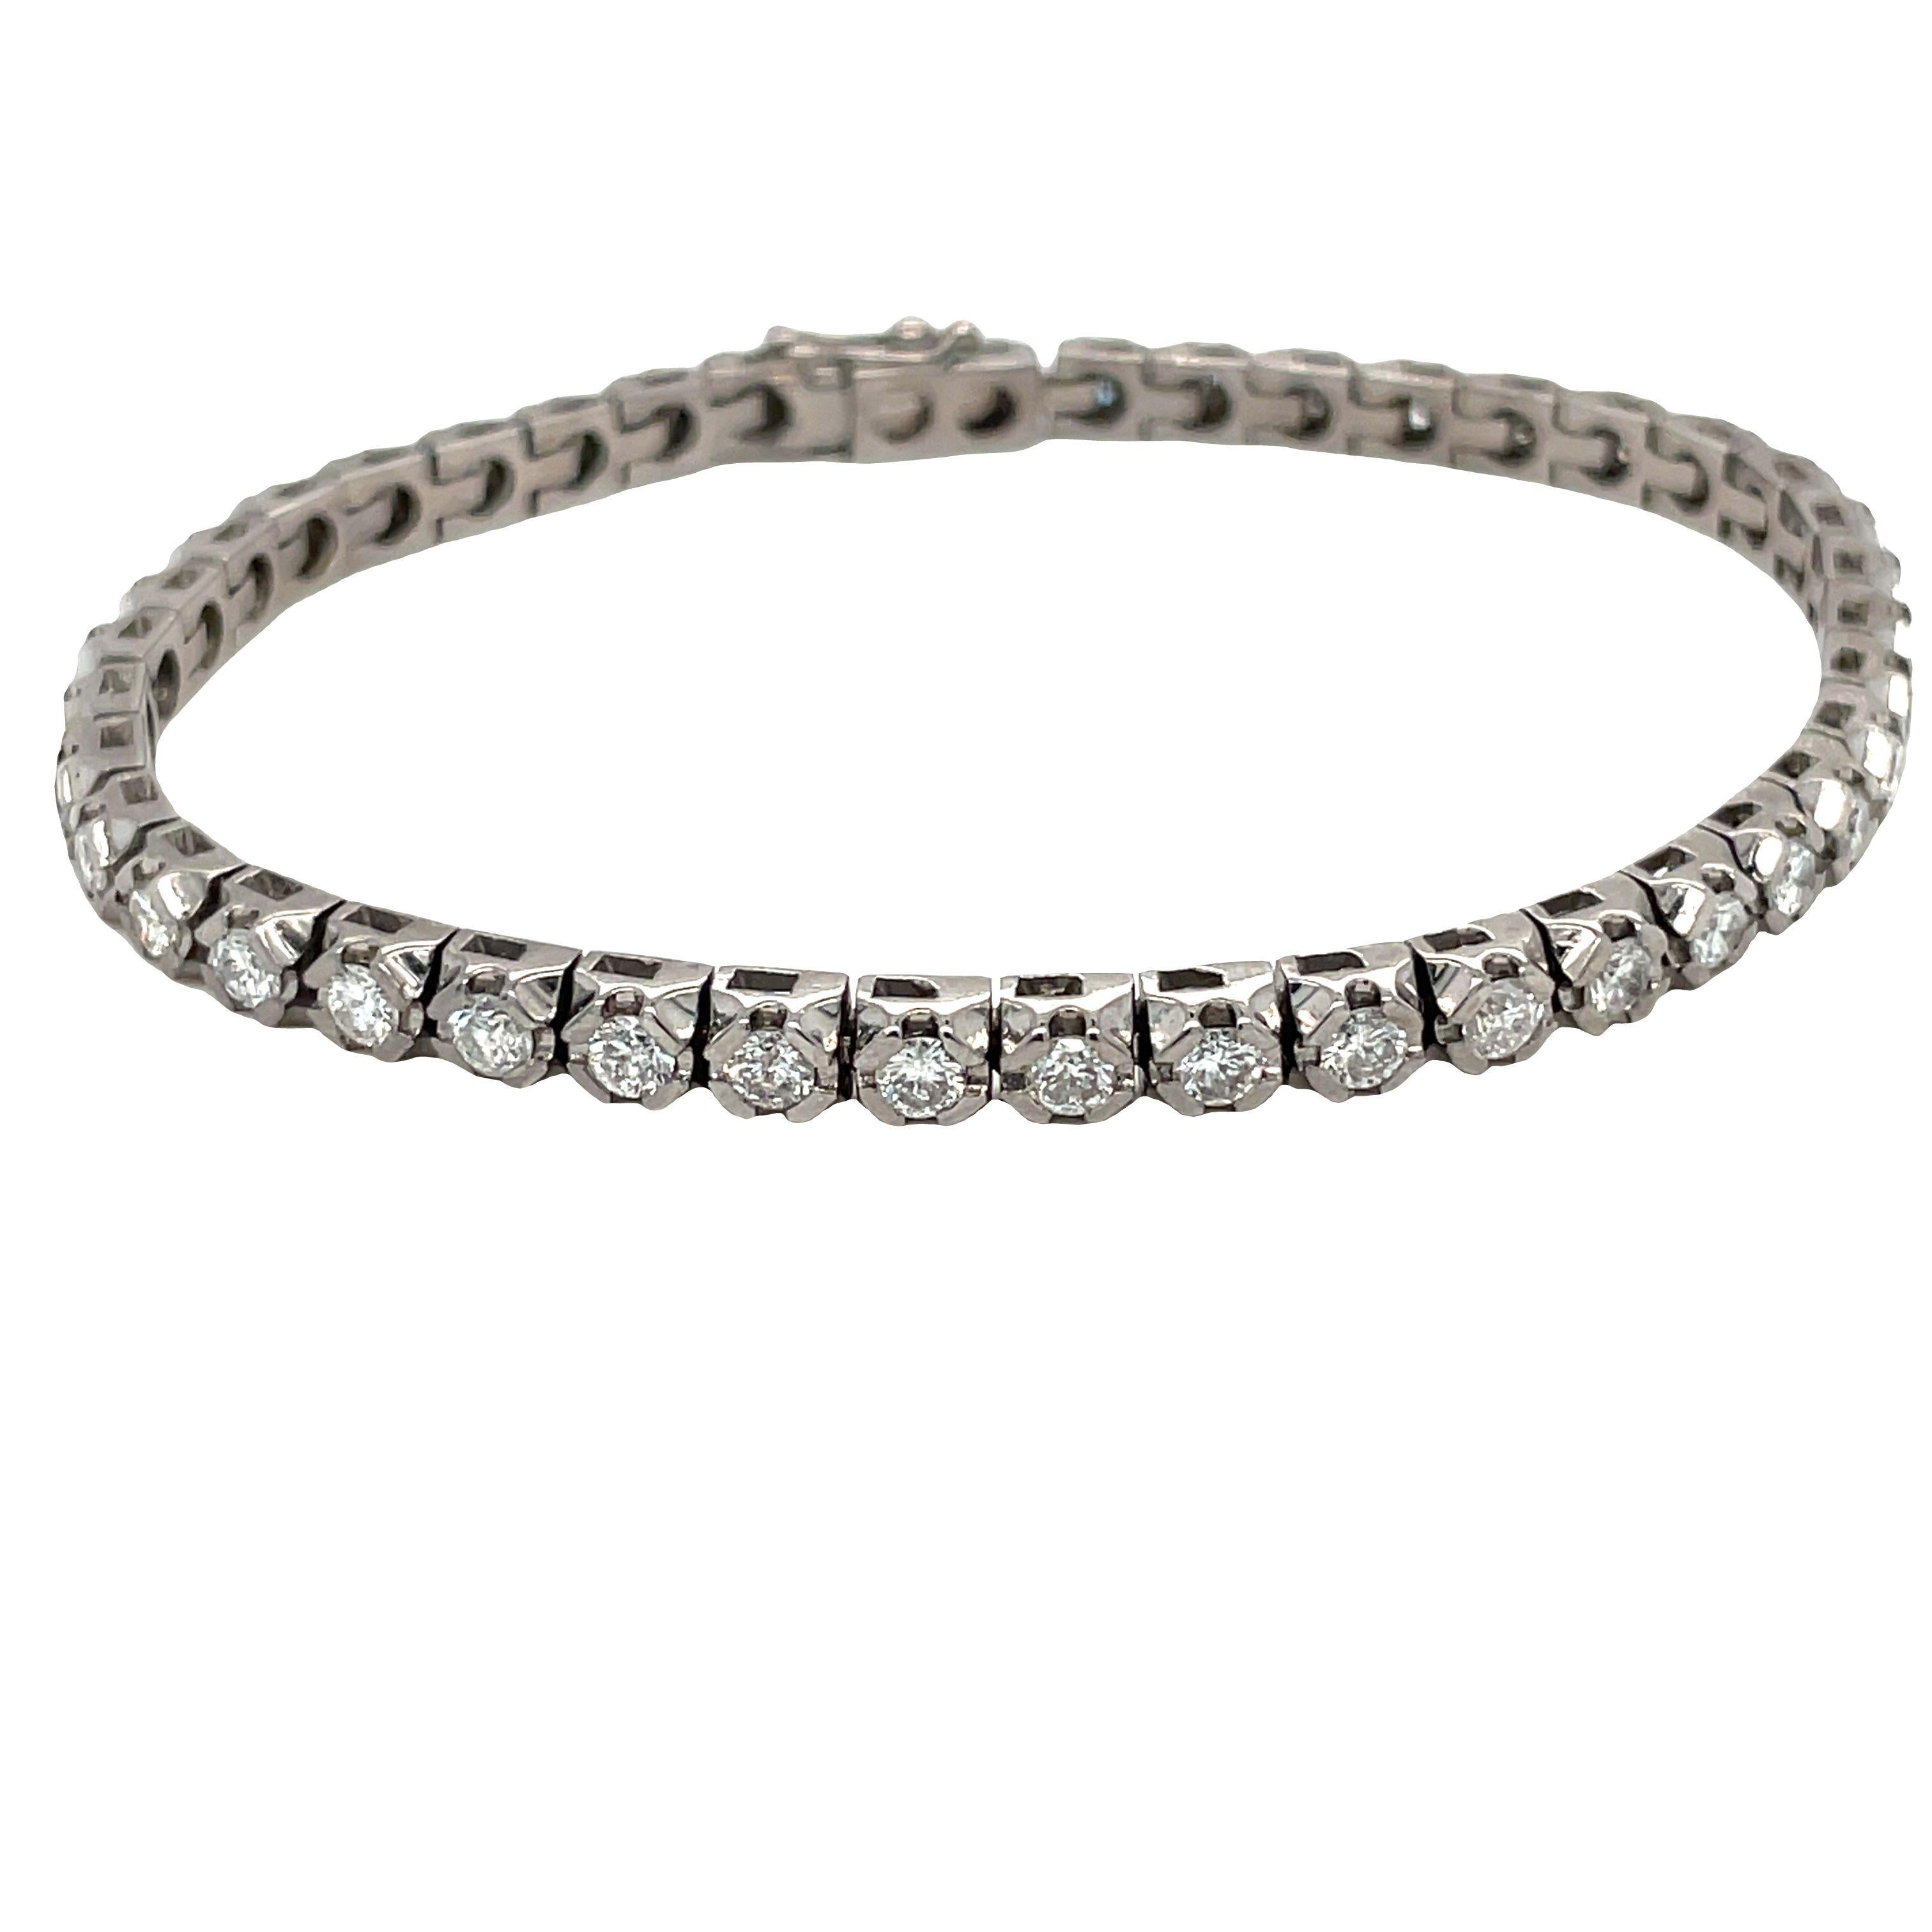 This delightful diamond tennis bracelet is as stunning as it is sophisticated. Made from 18 karat white gold, this stunning bracelet features 42 brilliant diamonds, each delicately set in a 4 square-prong setting. The diamonds are G-H color and SI